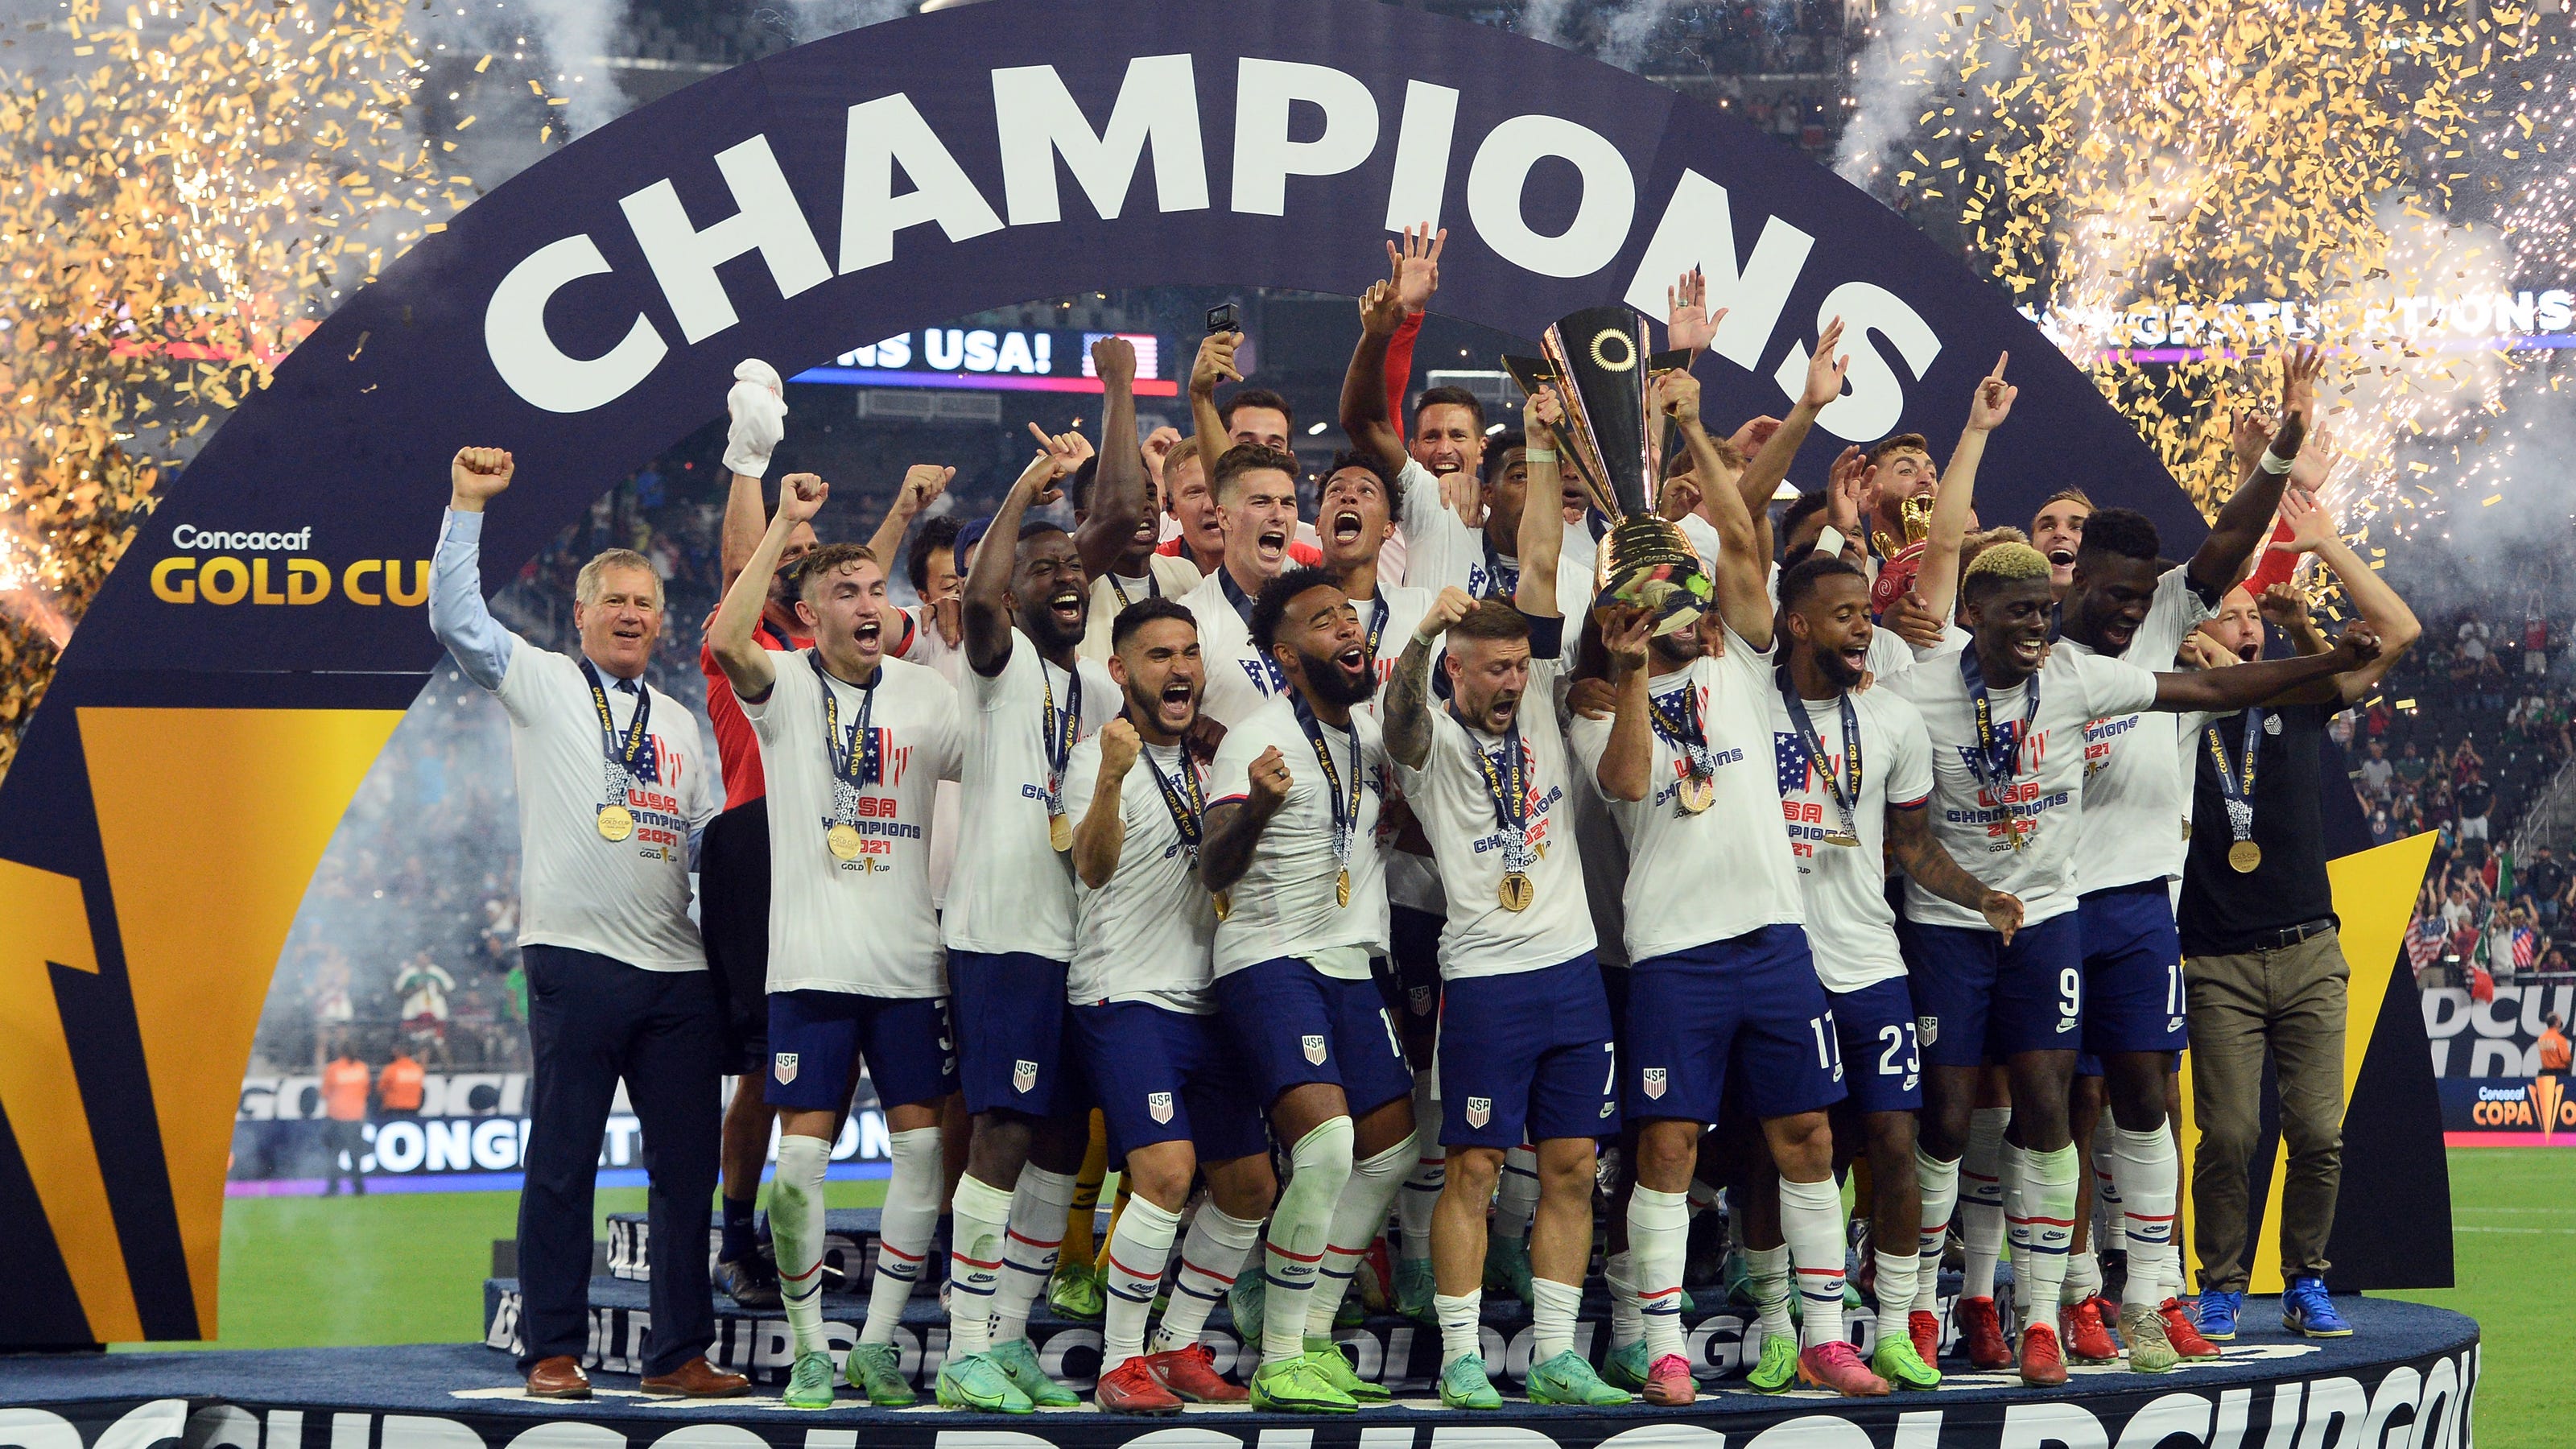 Usmnt Wins Concacaf Gold Cup Defeats Mexico In Final